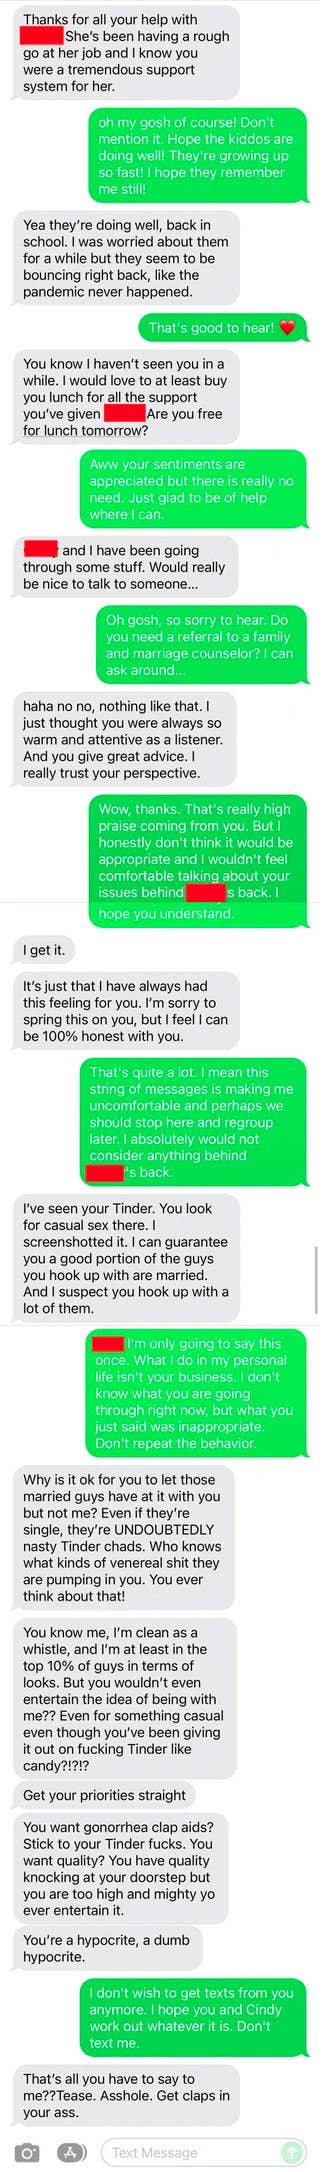 Text. exchange that ends with, "That's all you have to say to me??Tease. Asshole. Get claps in your ass."